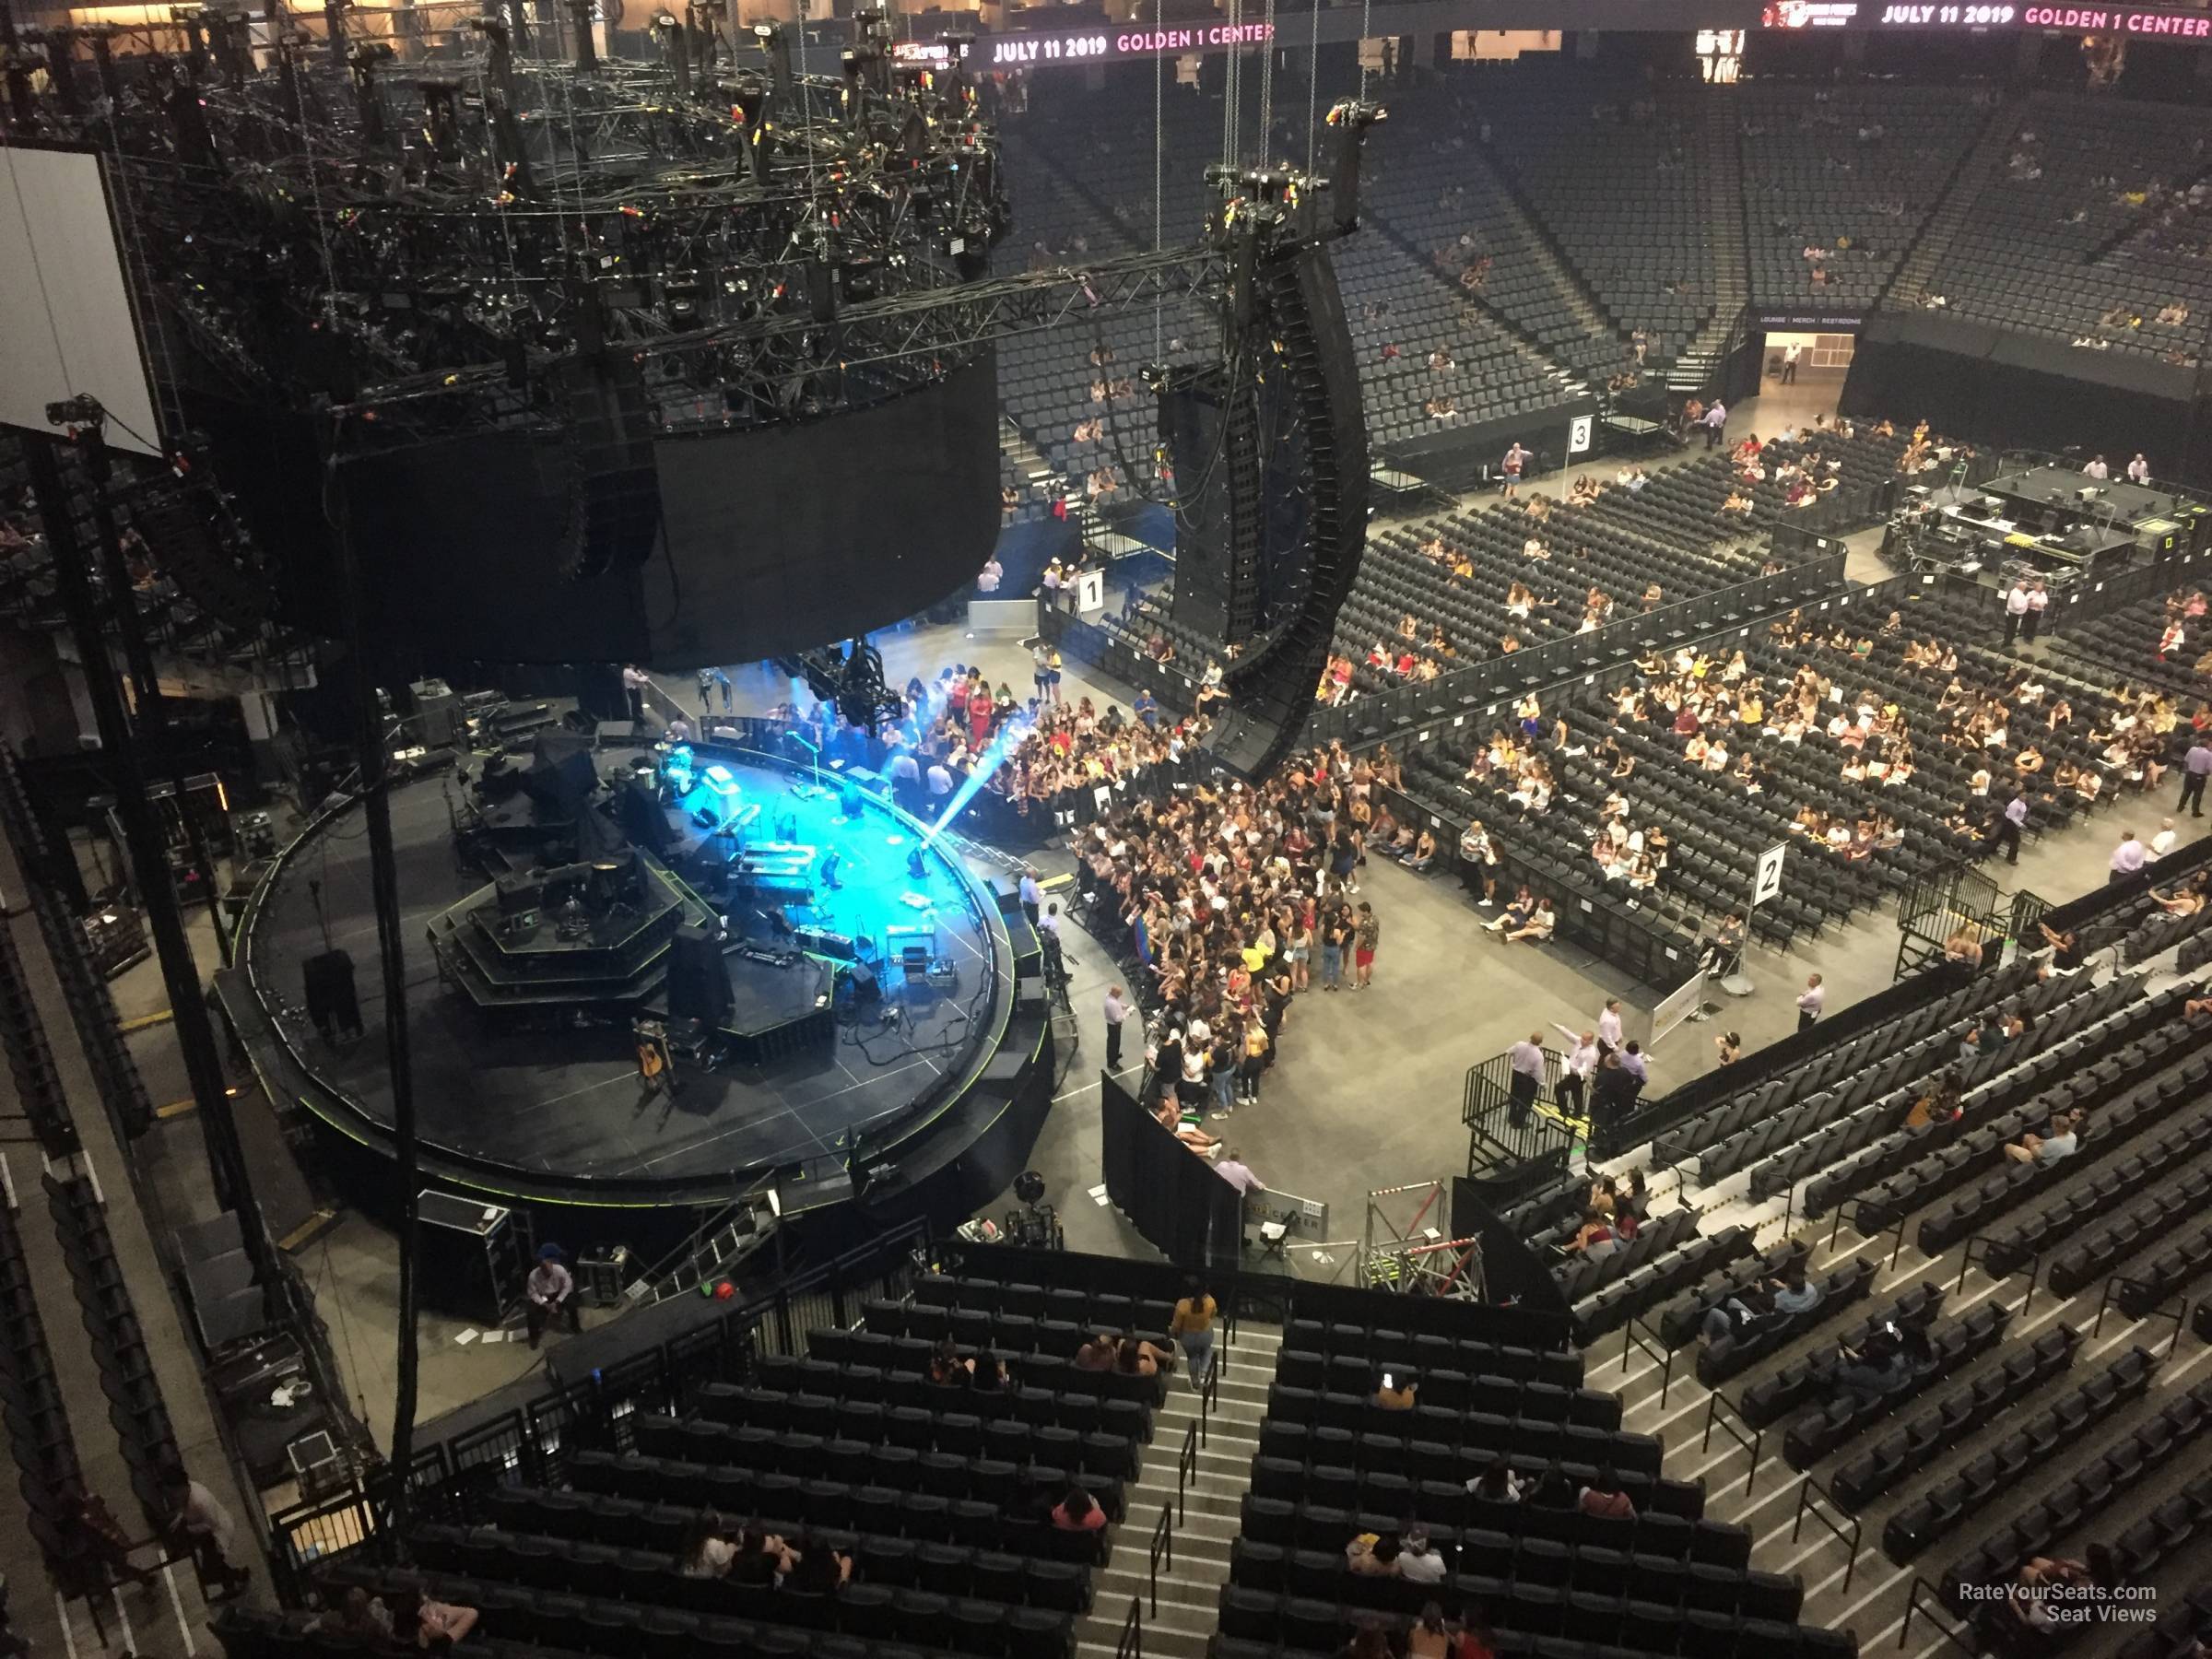 section 221, row c seat view  for concert - golden 1 center